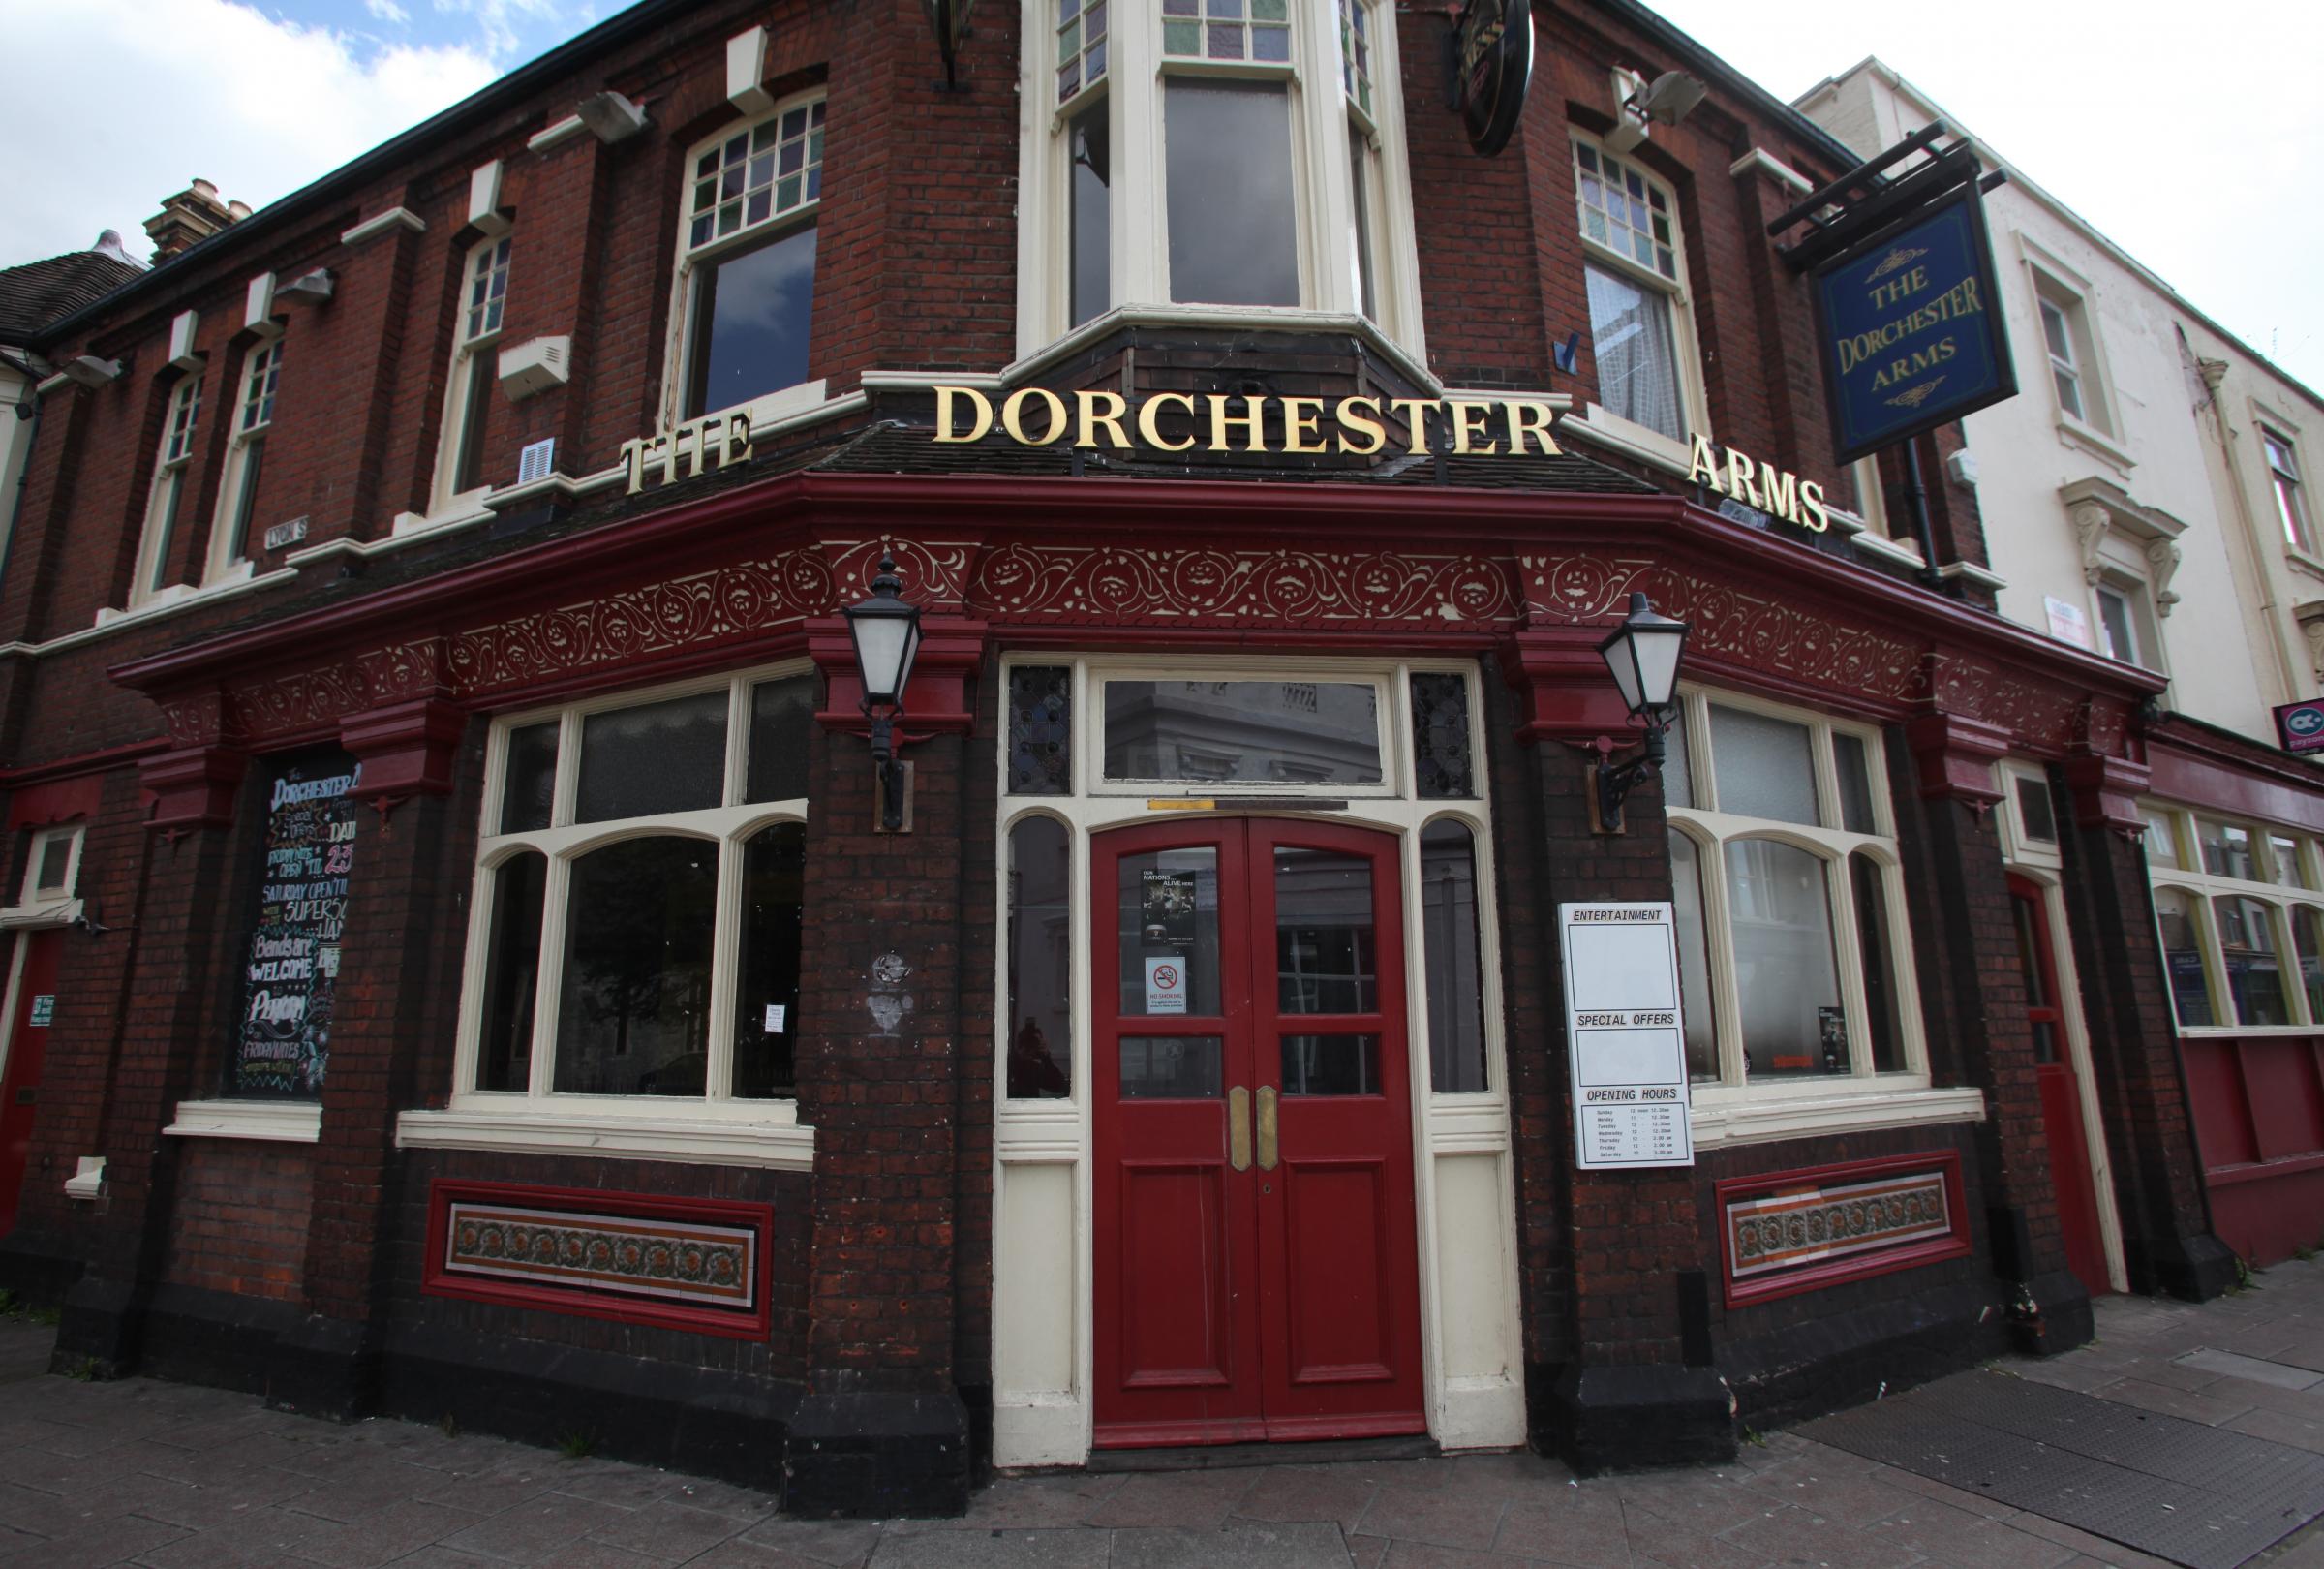 16 April 2012 - The Dorchester Arms pub in Southampton which has been saved from closure